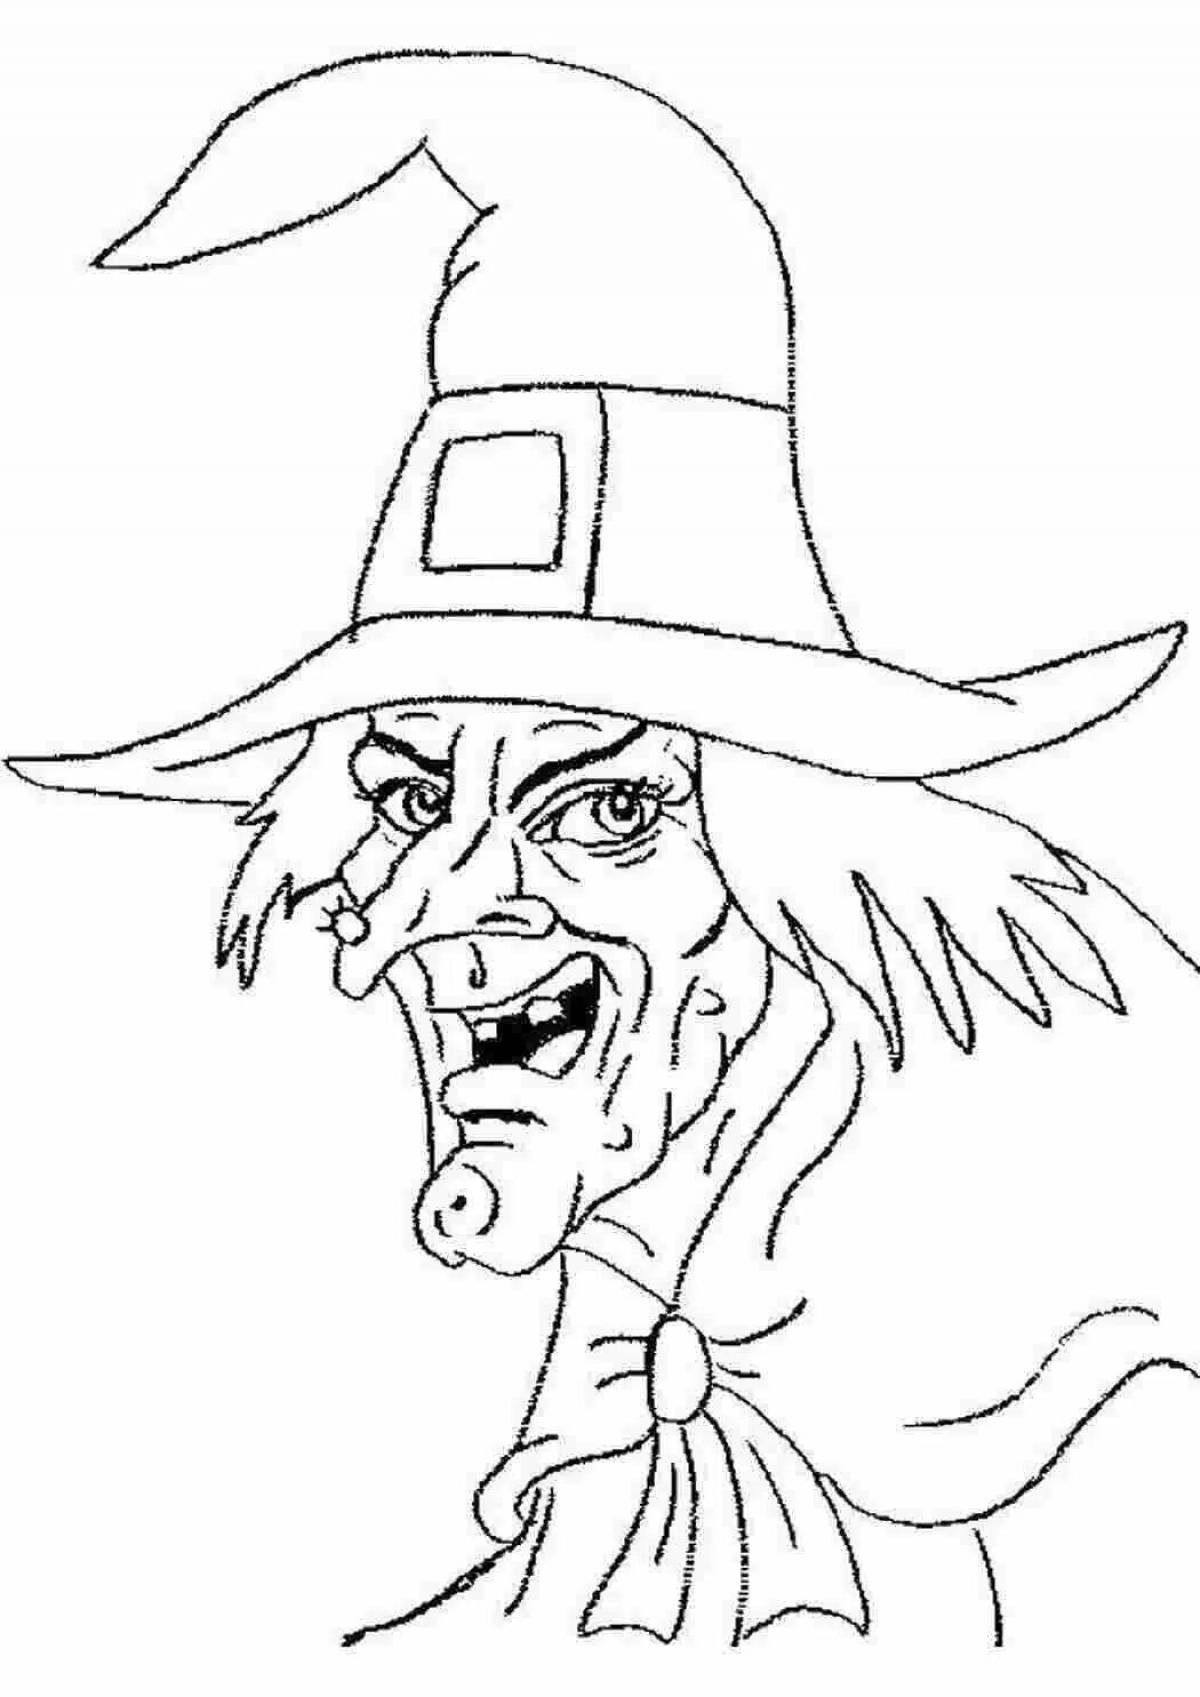 Wicked witch menacing coloring book